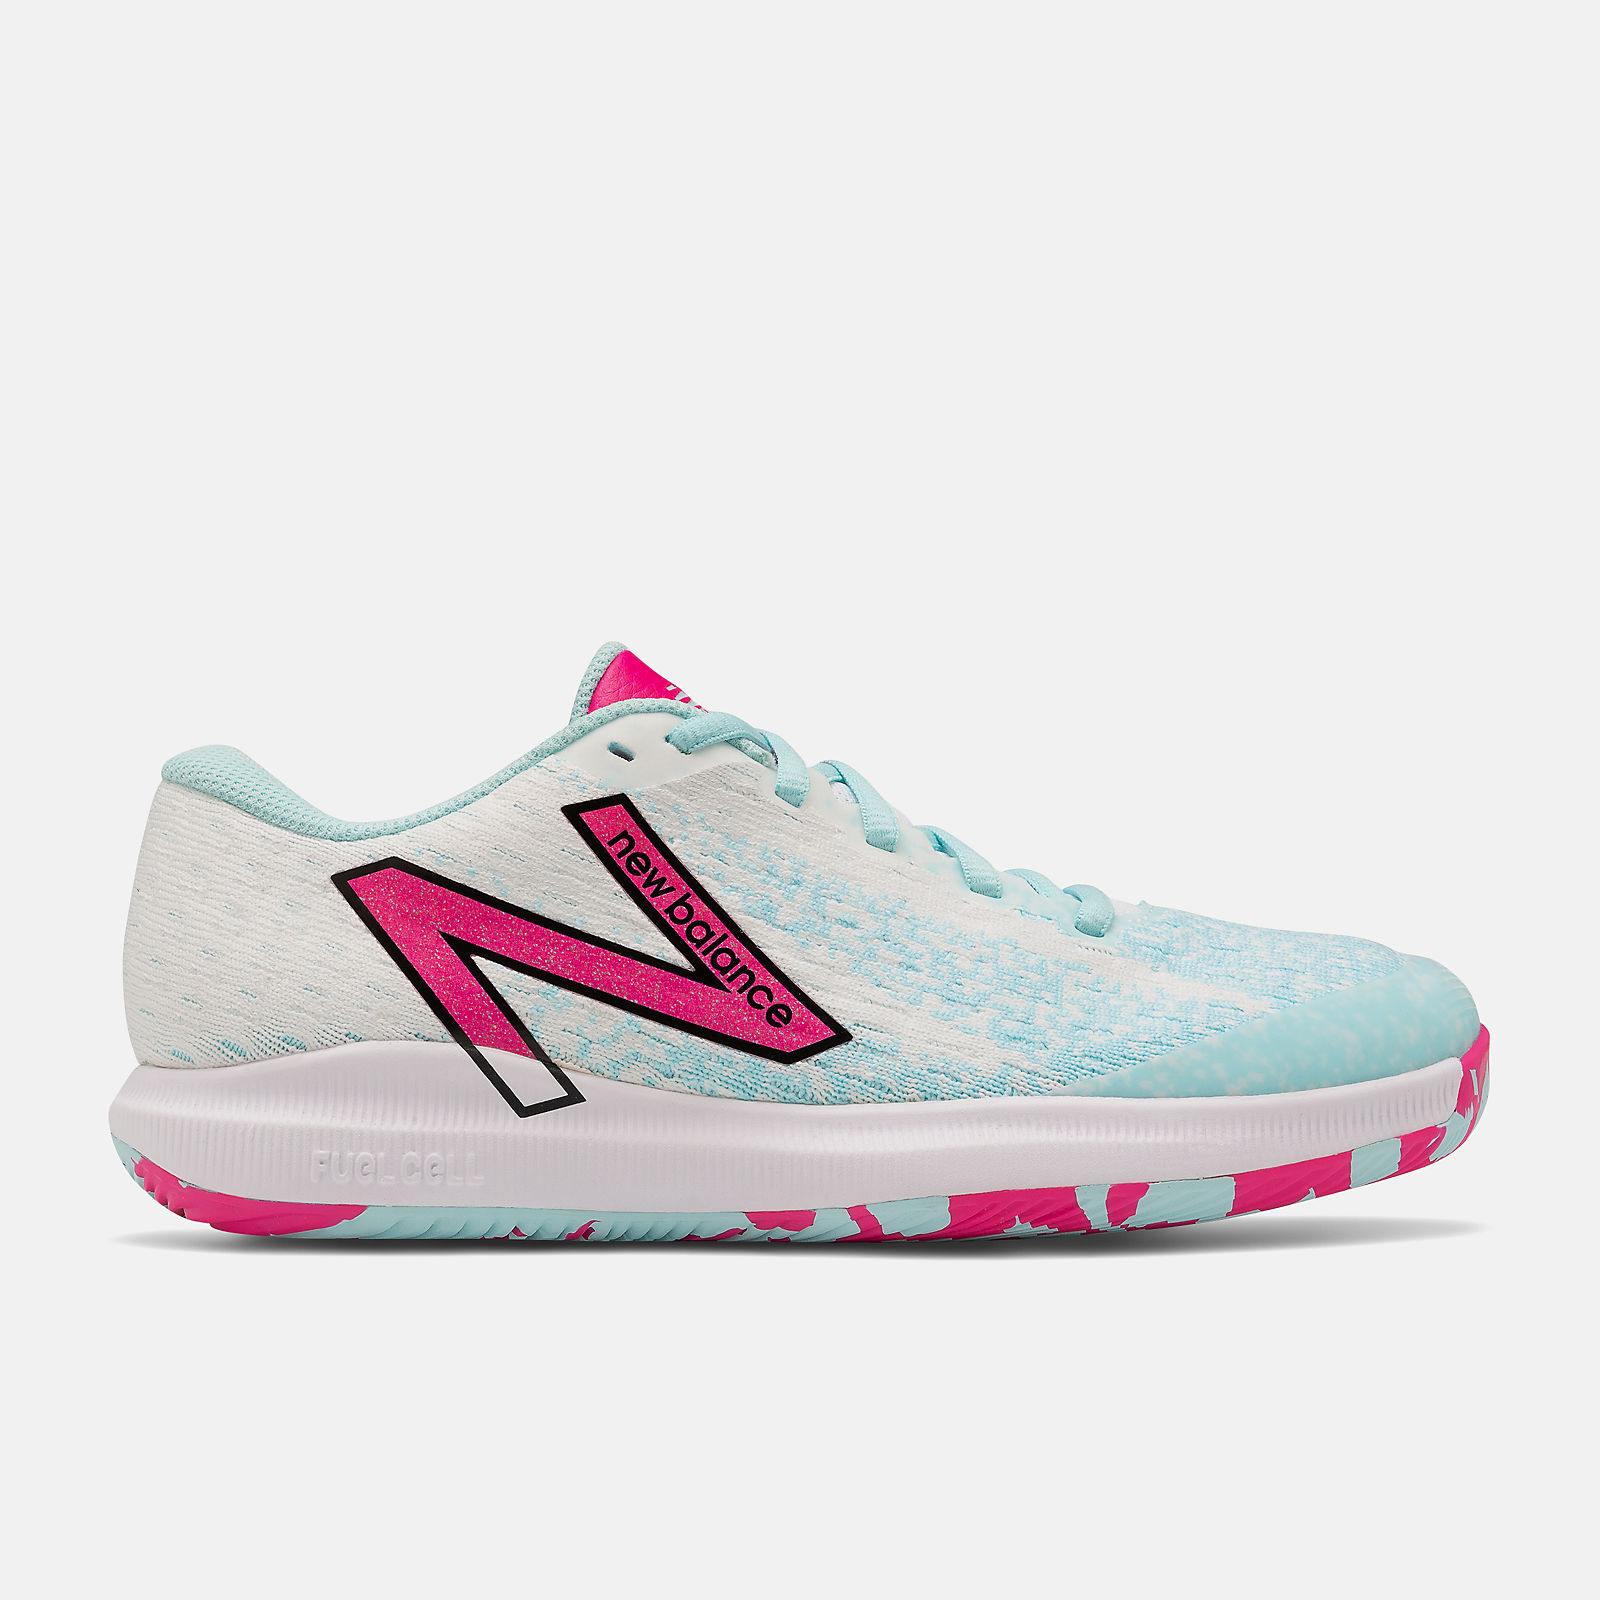 New Balance Women's Fuel Cell low-top sneakers